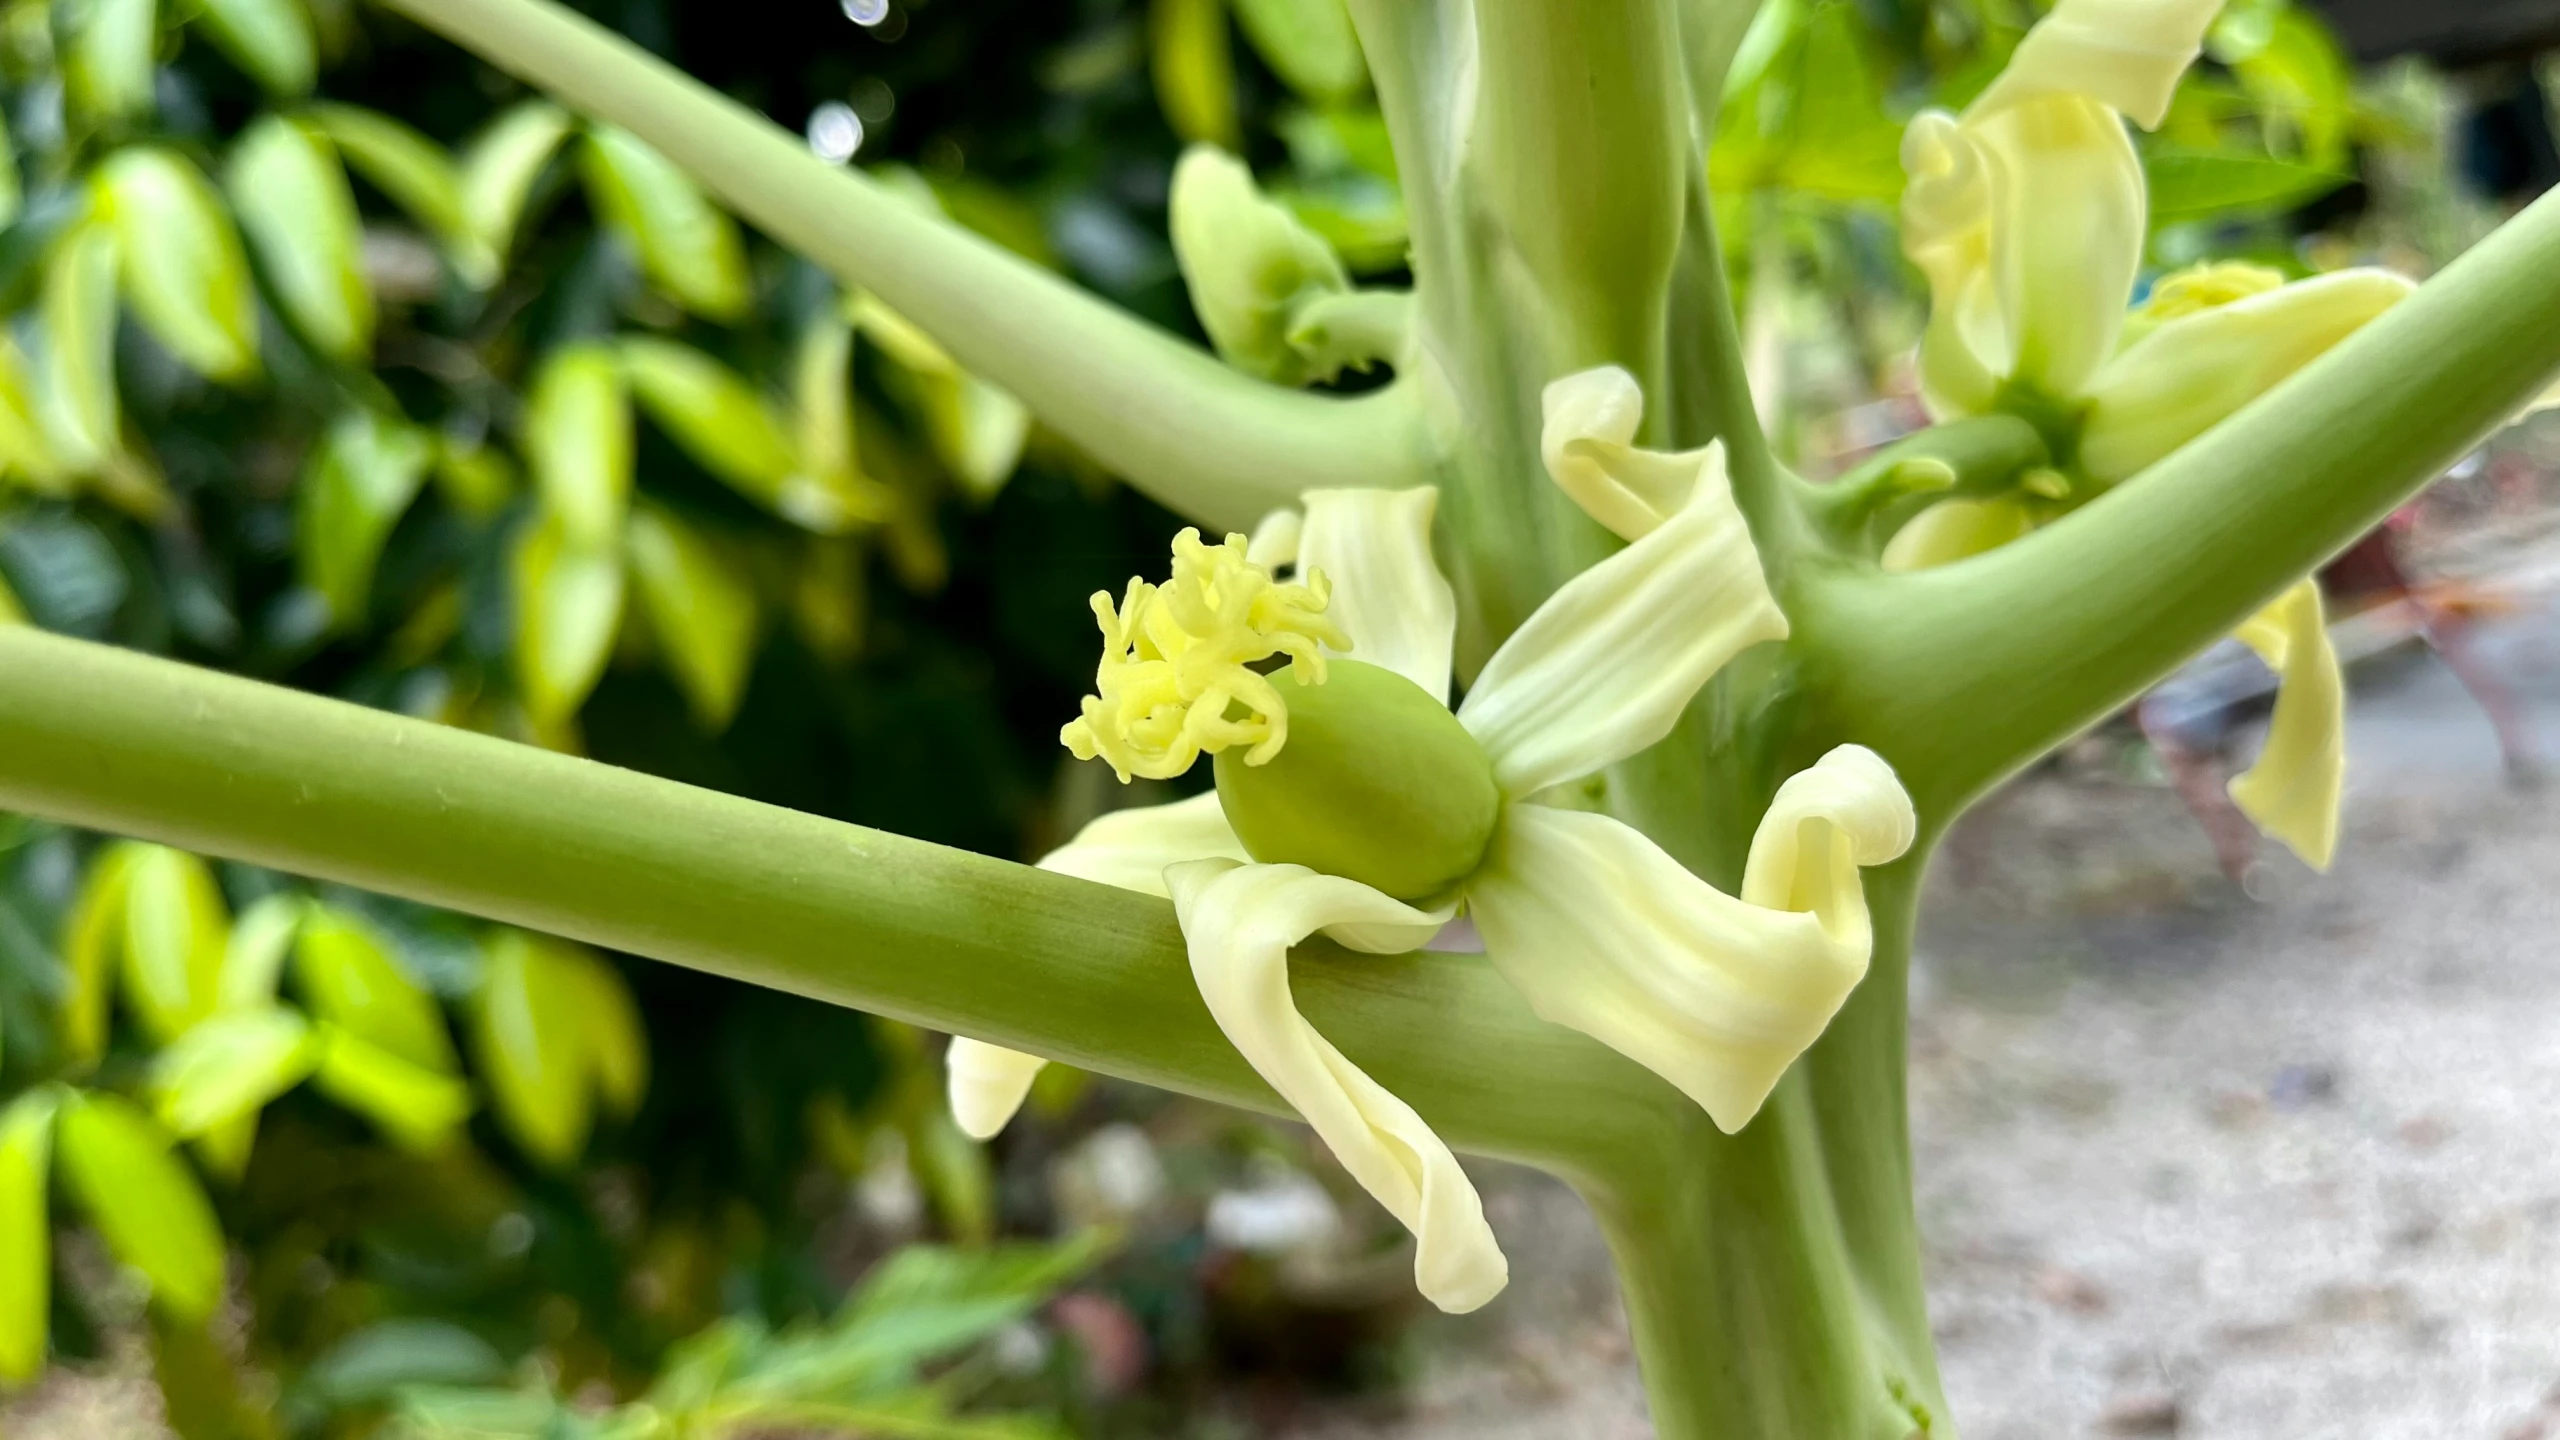 a close up image of a flower that looks like celery